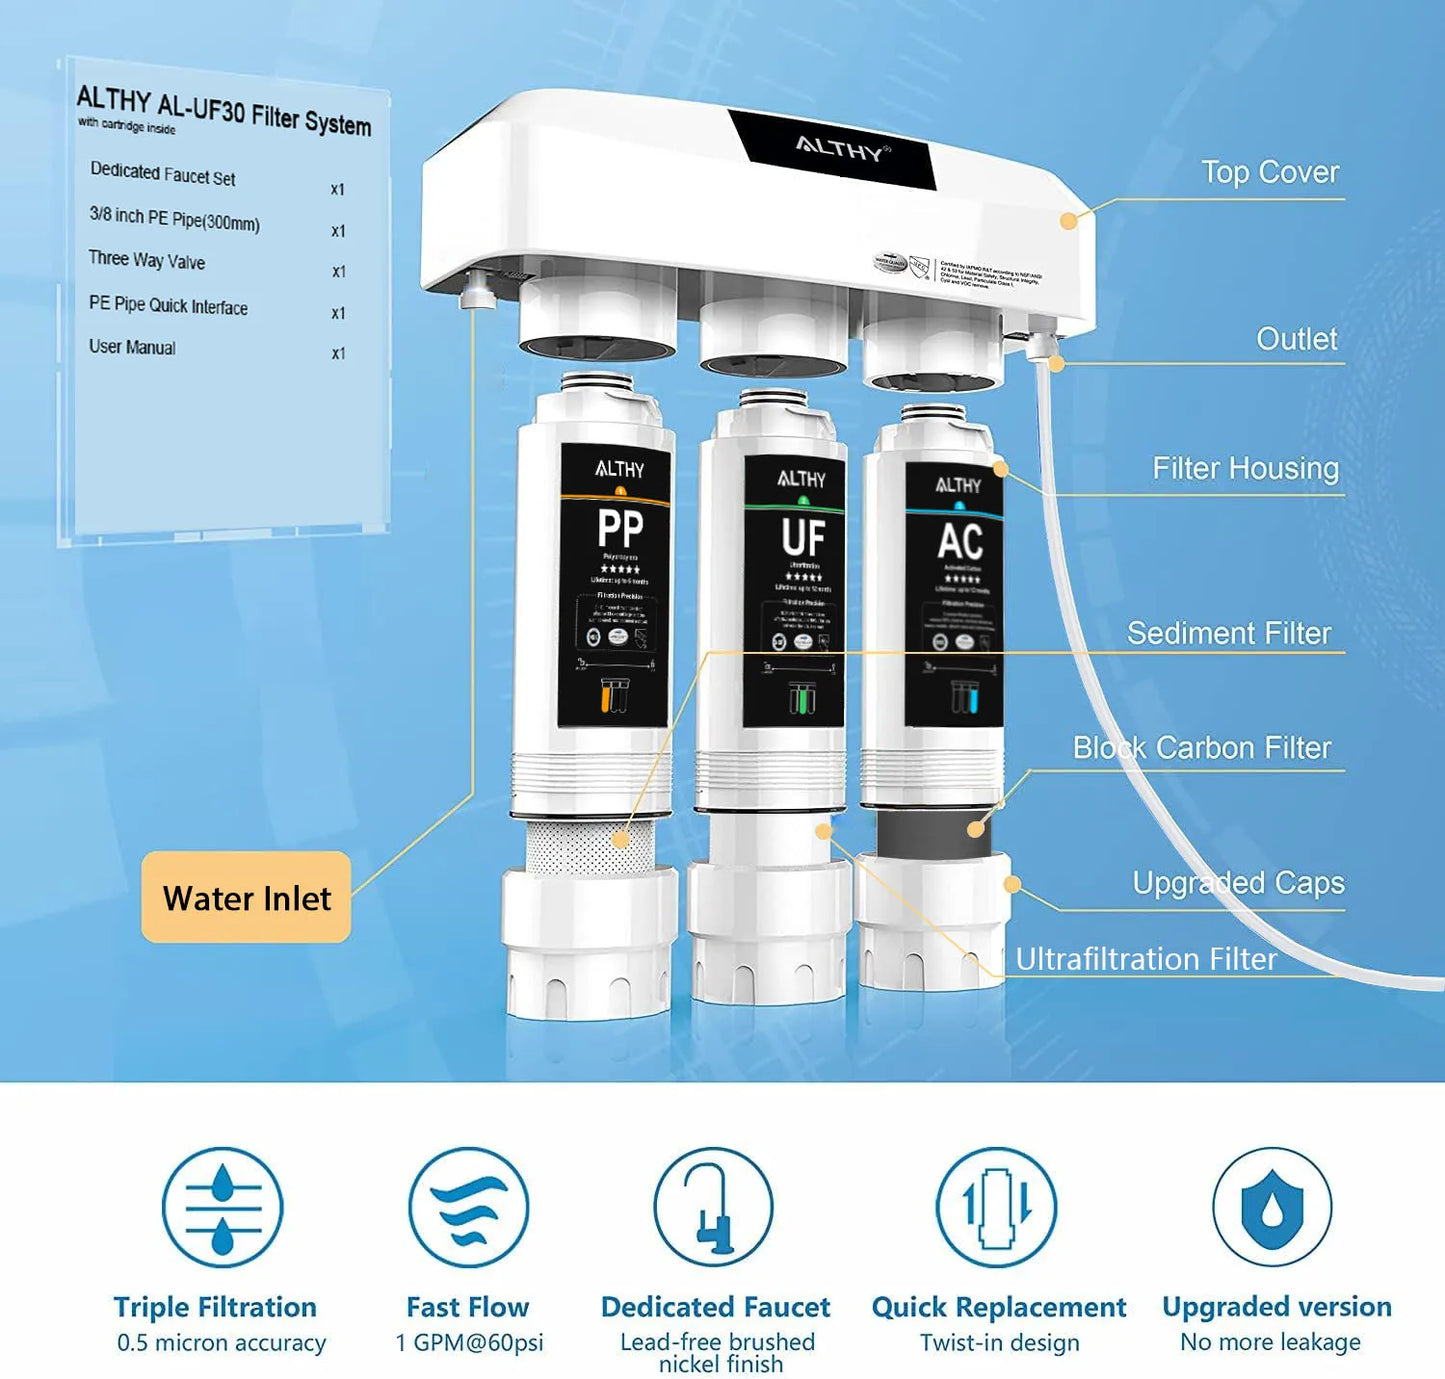 ALTHY Under Sink Ultrafiltration Water Filter Purifier System, 3 Stage PP+UF+AC,Remove Lead, Chlorine, Bacteria & Bad Taste